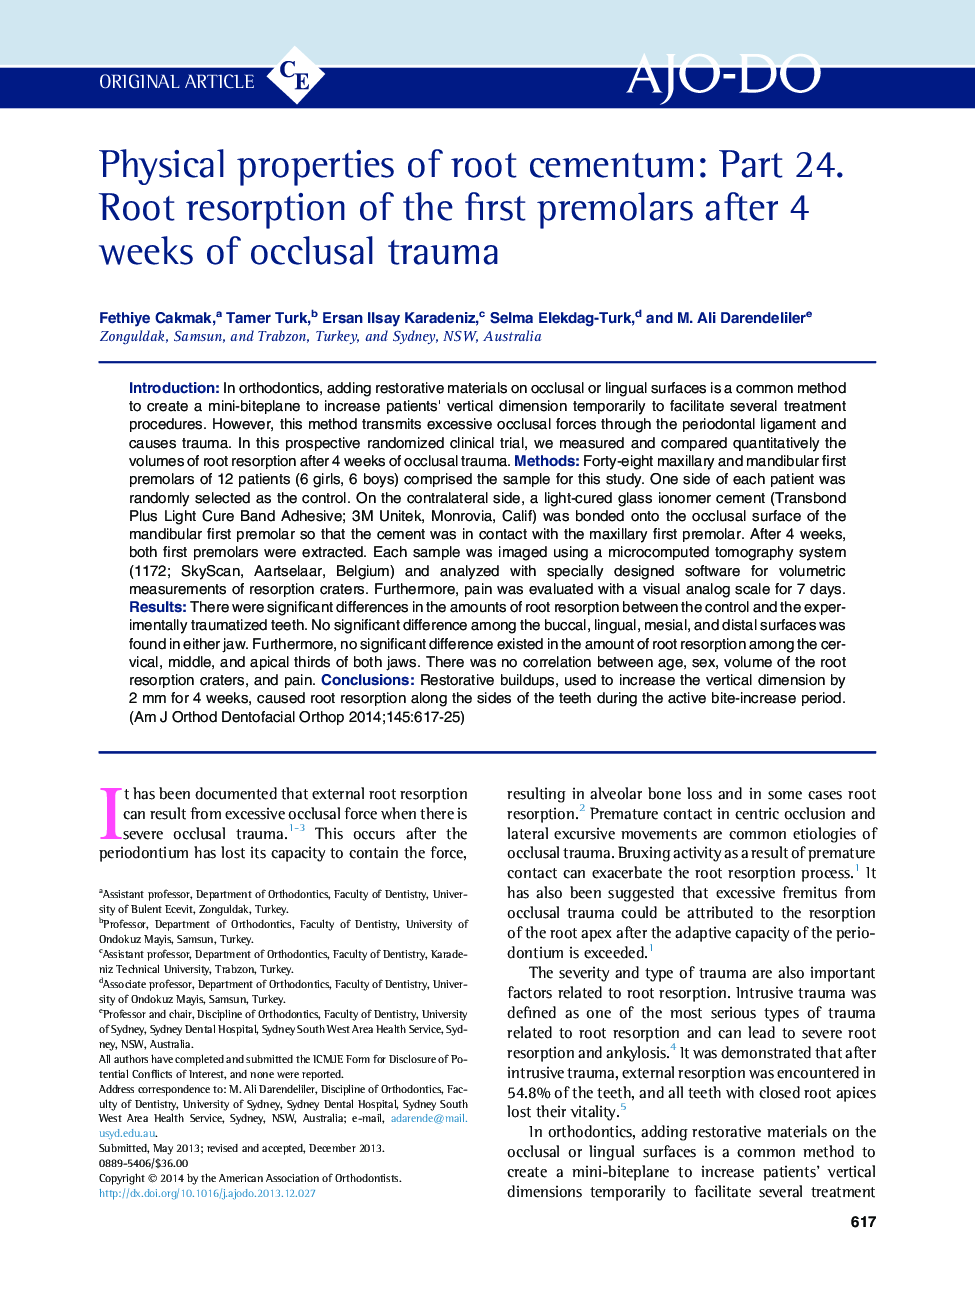 Physical properties of root cementum: Part 24. Root resorption of the first premolars after 4 weeks of occlusal trauma 